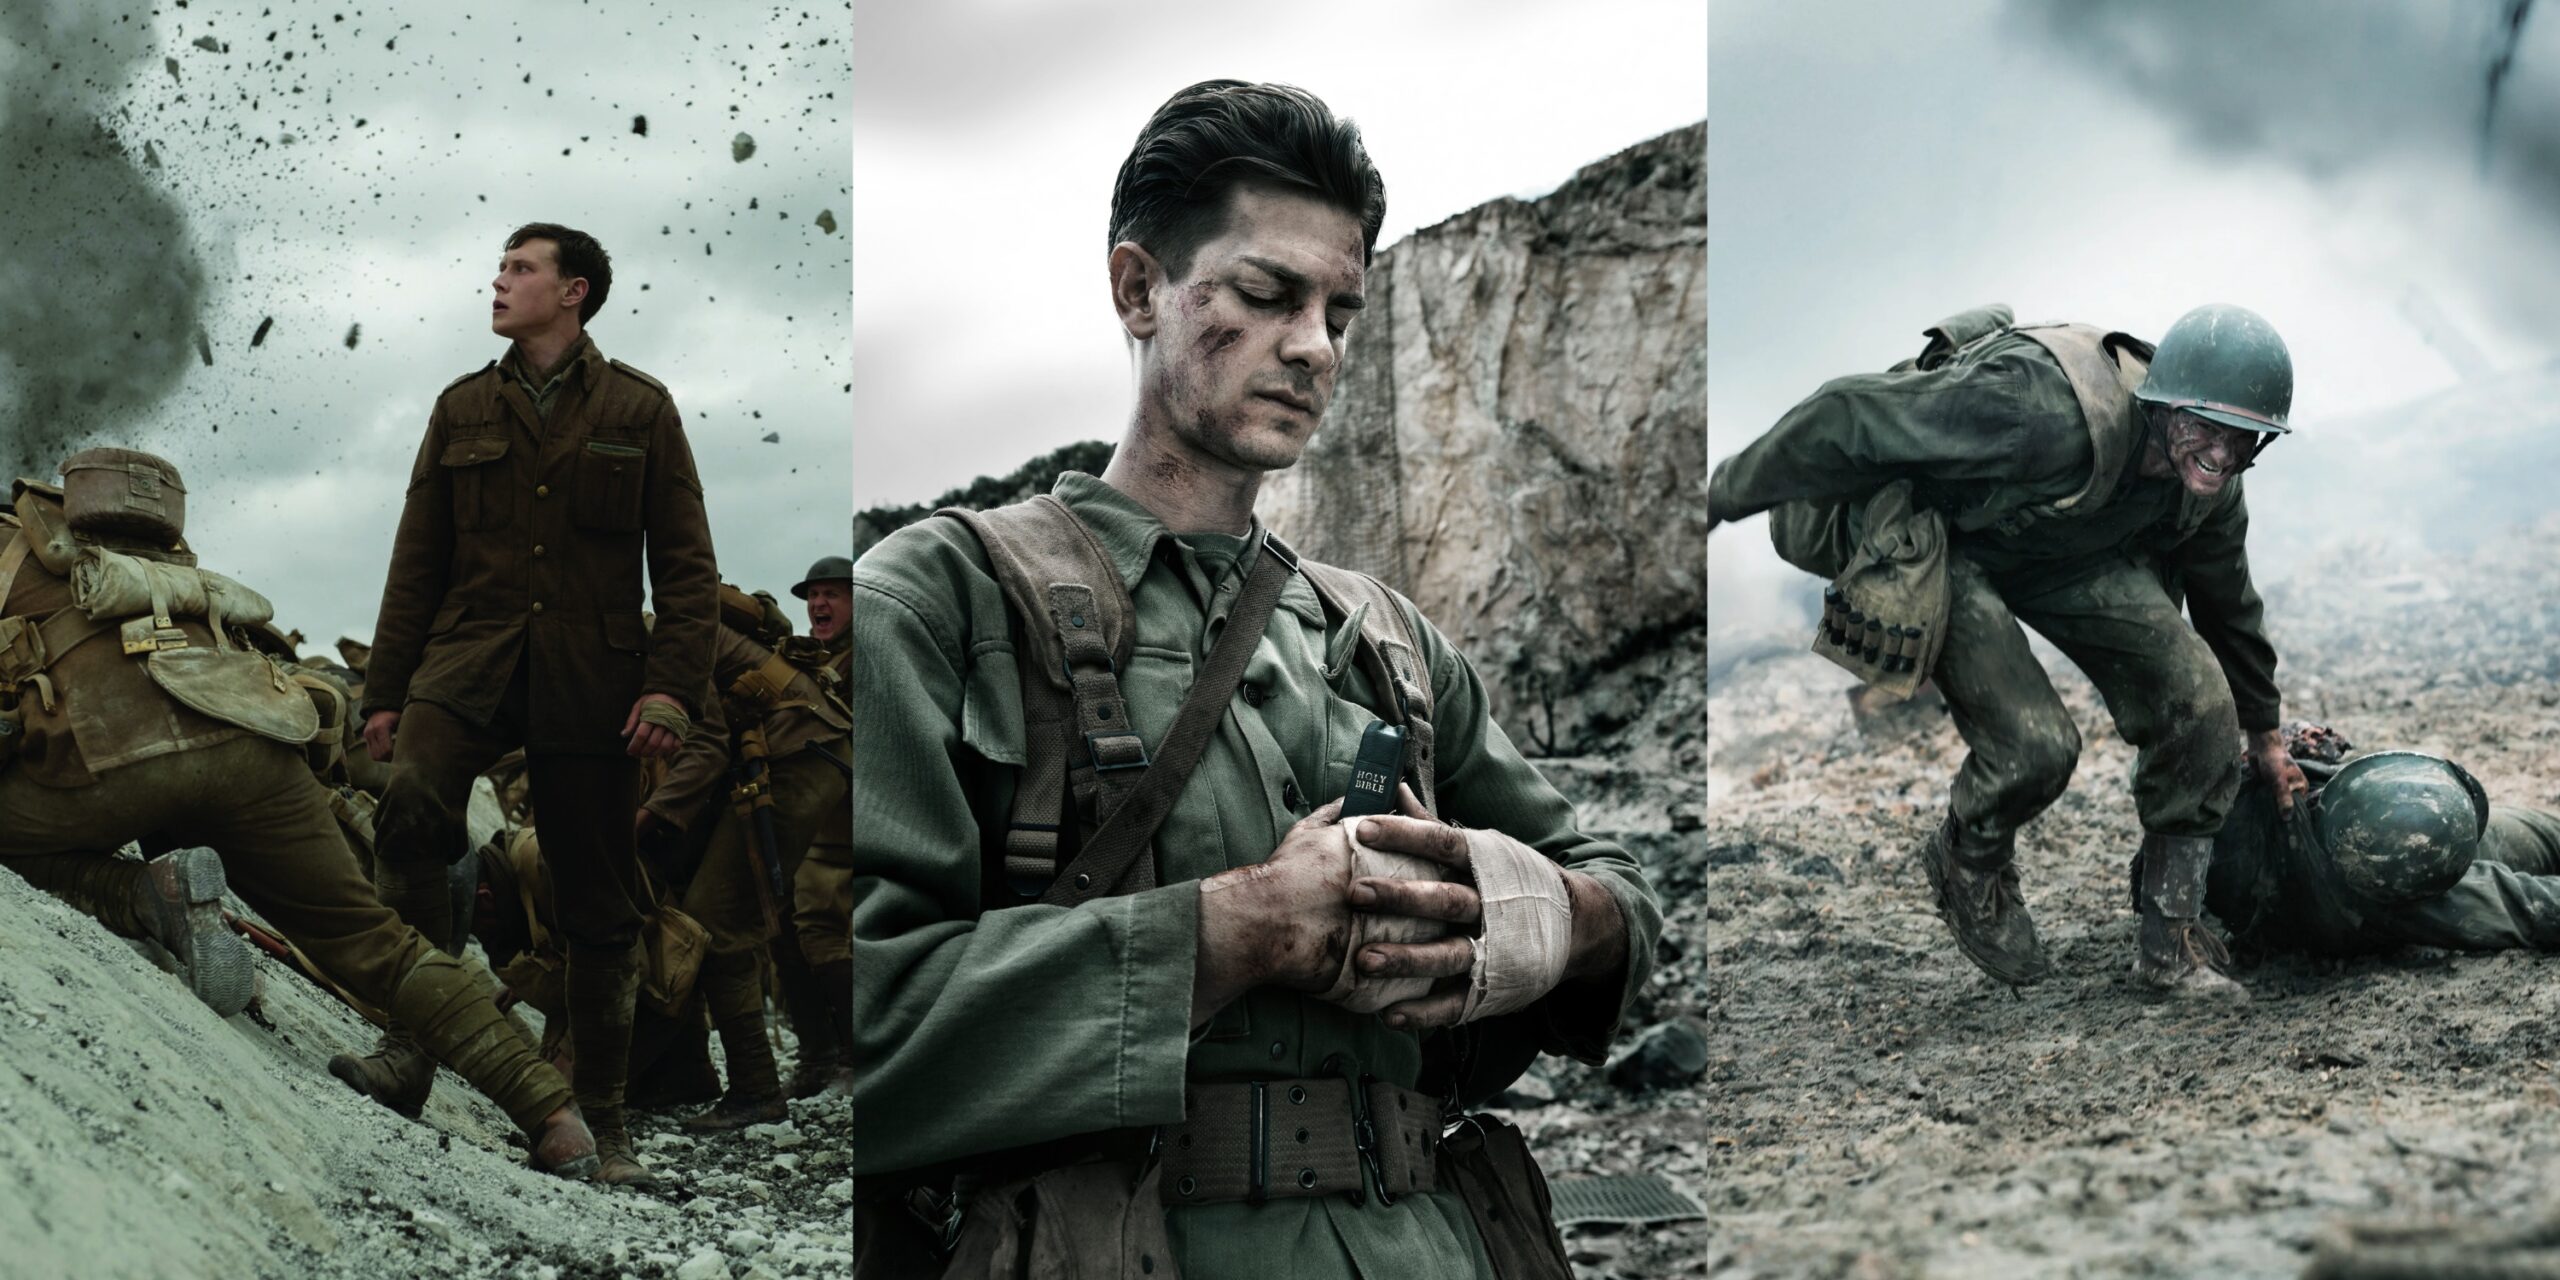 10 Most Poignant War Movies of All Time